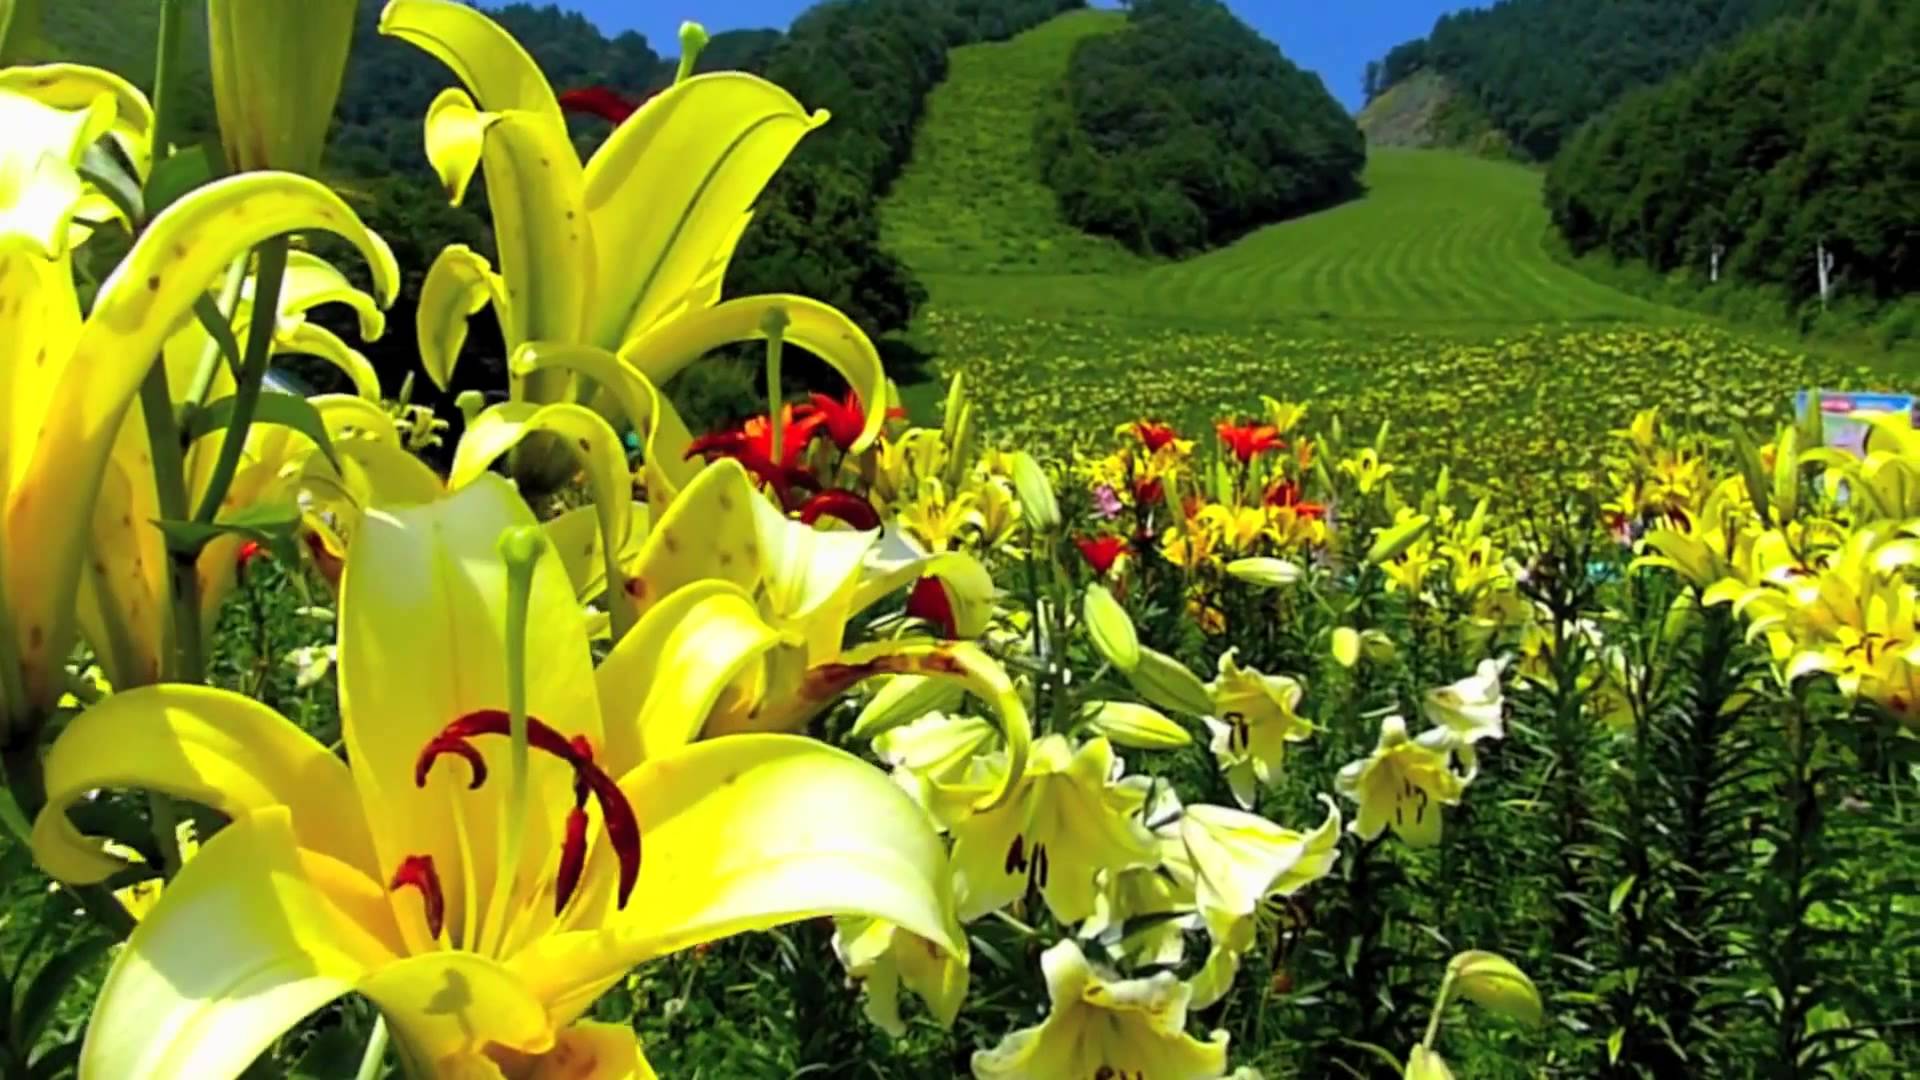 Flowers 50 - Video Background HD 1080p - YouTube